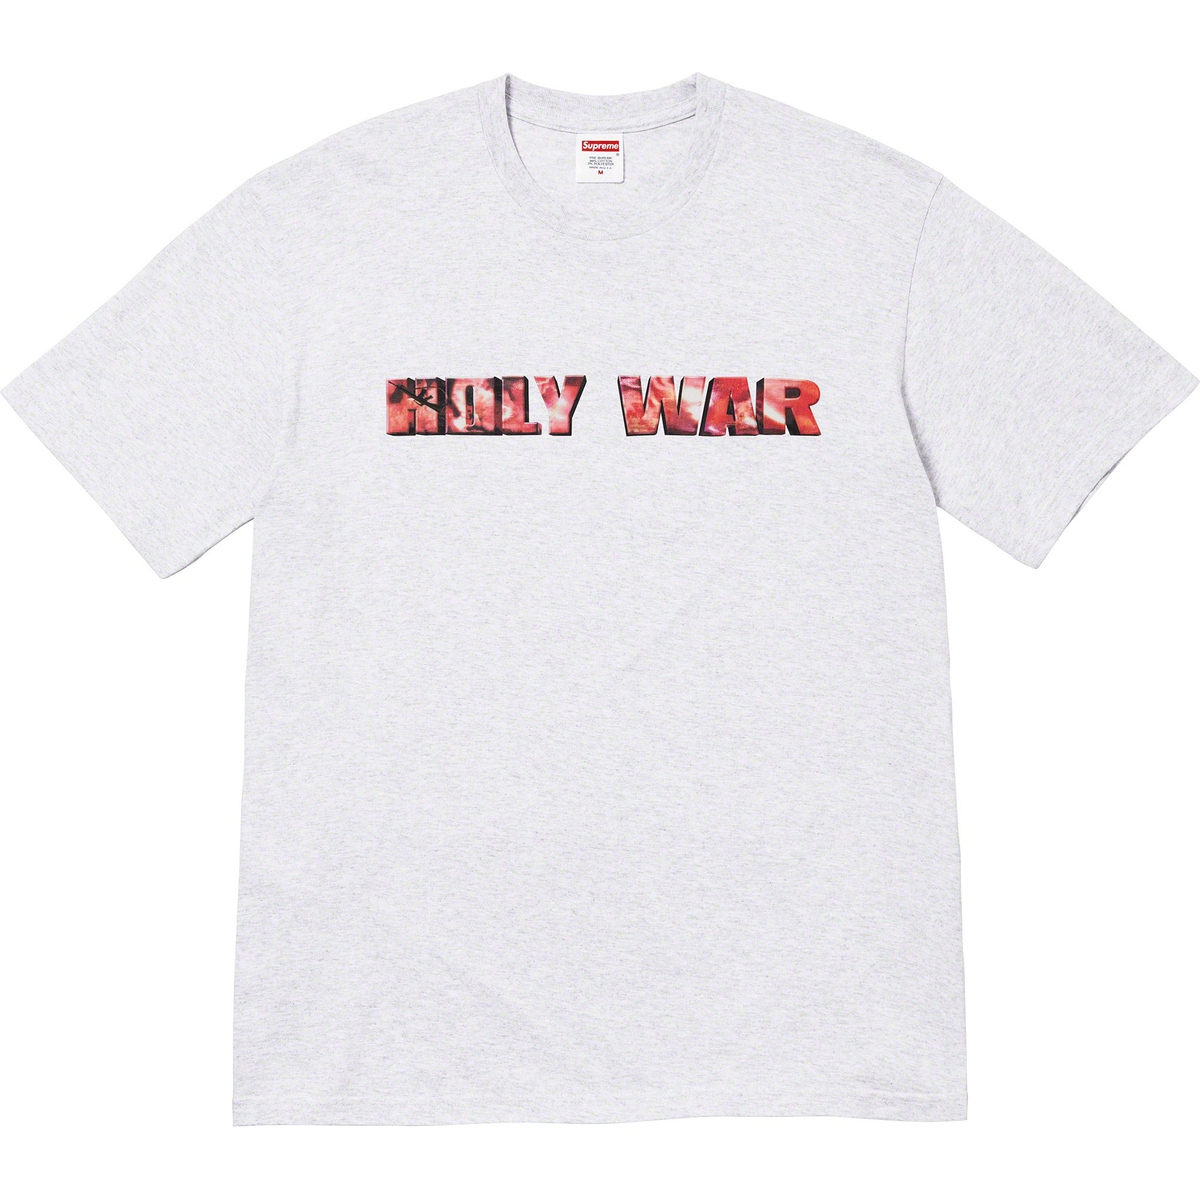 Supreme Holy War Tee released during fall winter 23 season